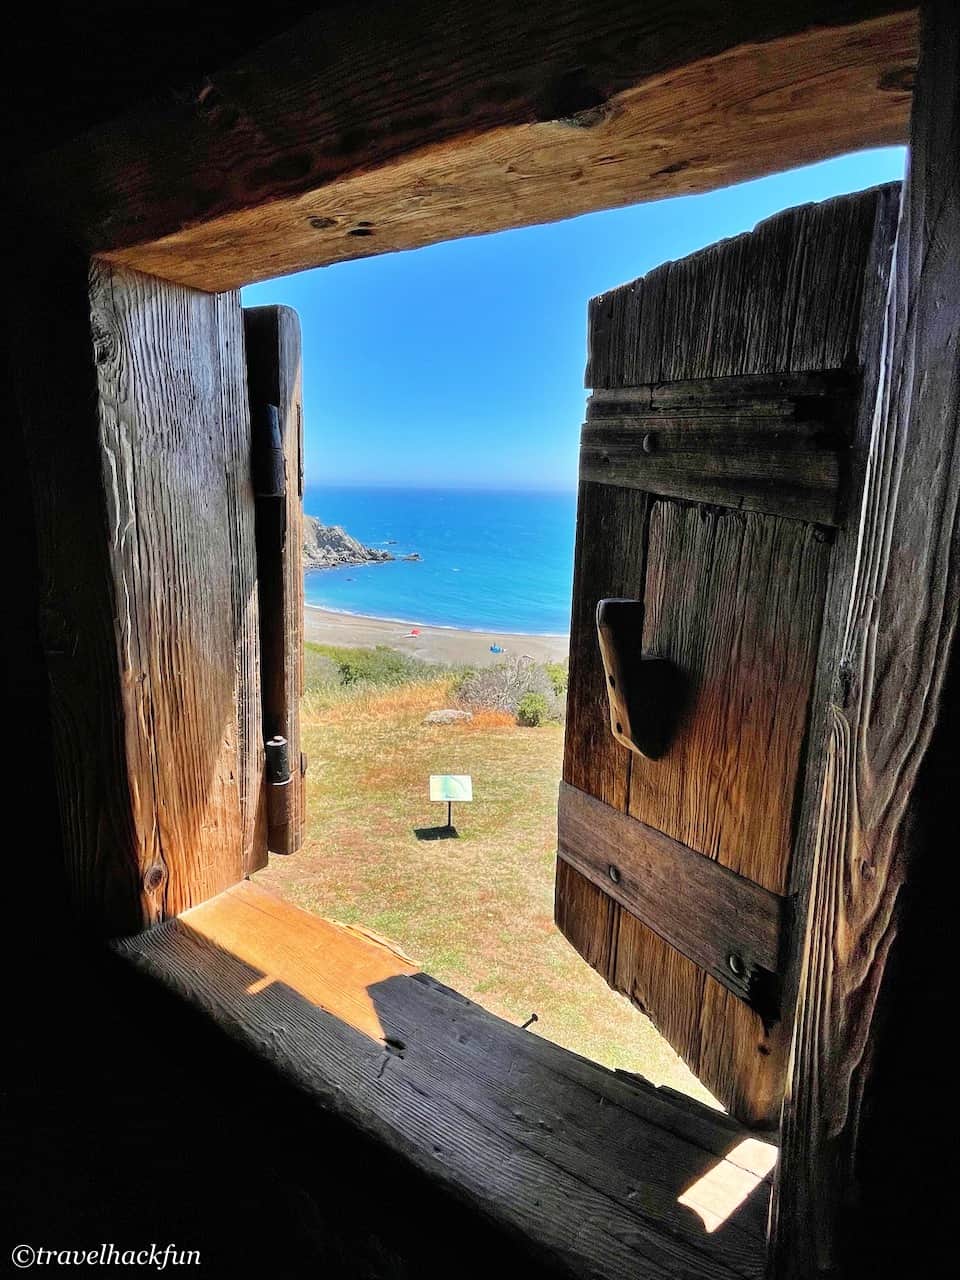 Fort Ross,俄羅斯堡,fort ross state park,fort ross state historic park,fort ross california 11